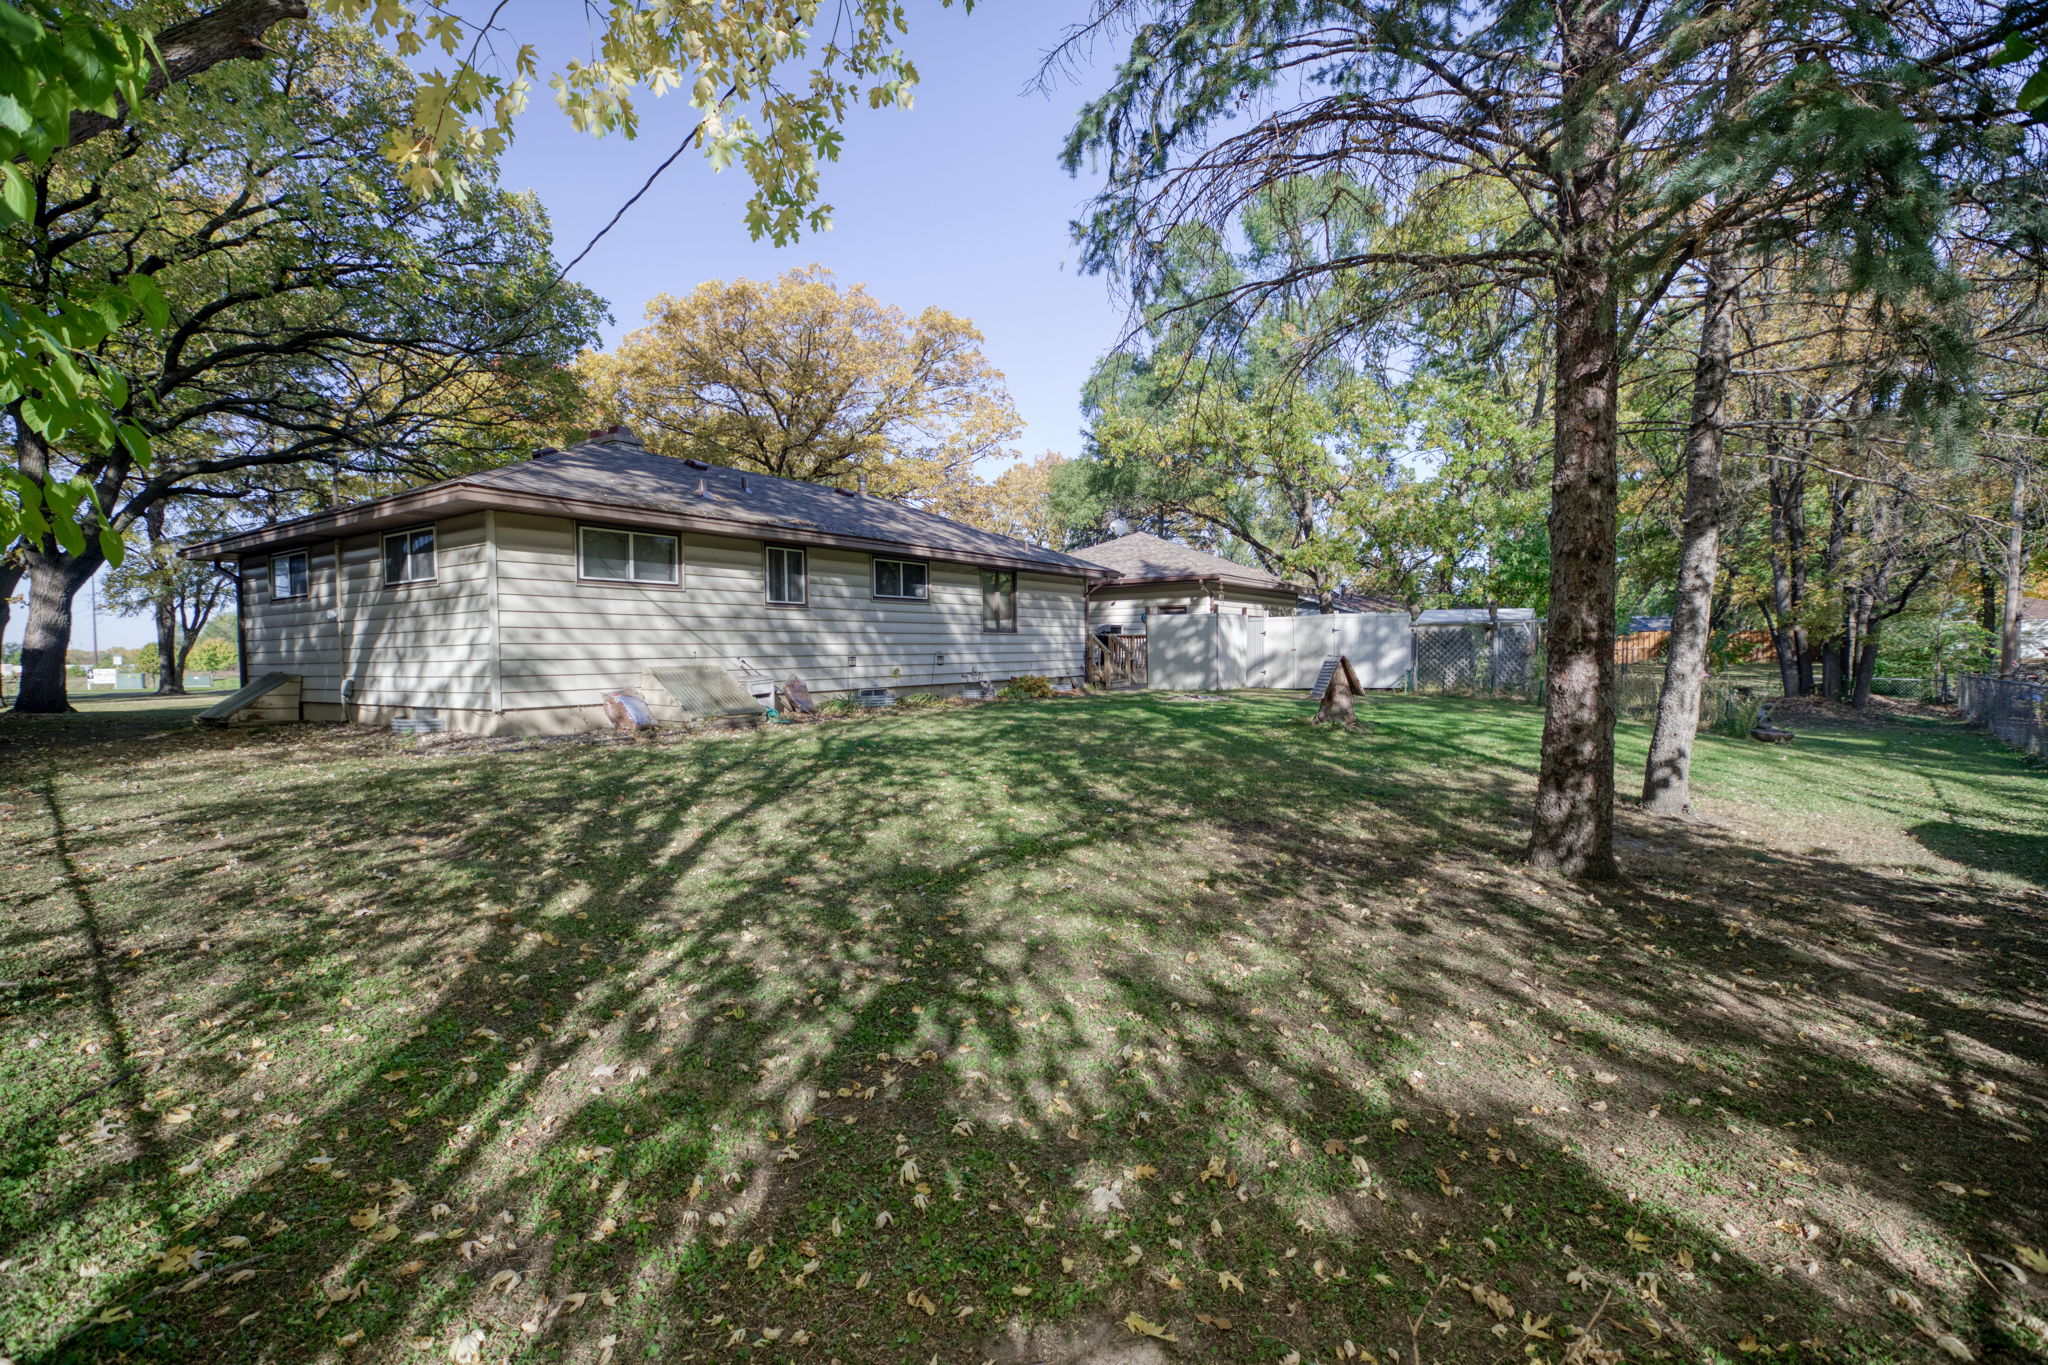  10131 Foley Blvd NW, Coon Rapids, MN 55448, US Photo 25